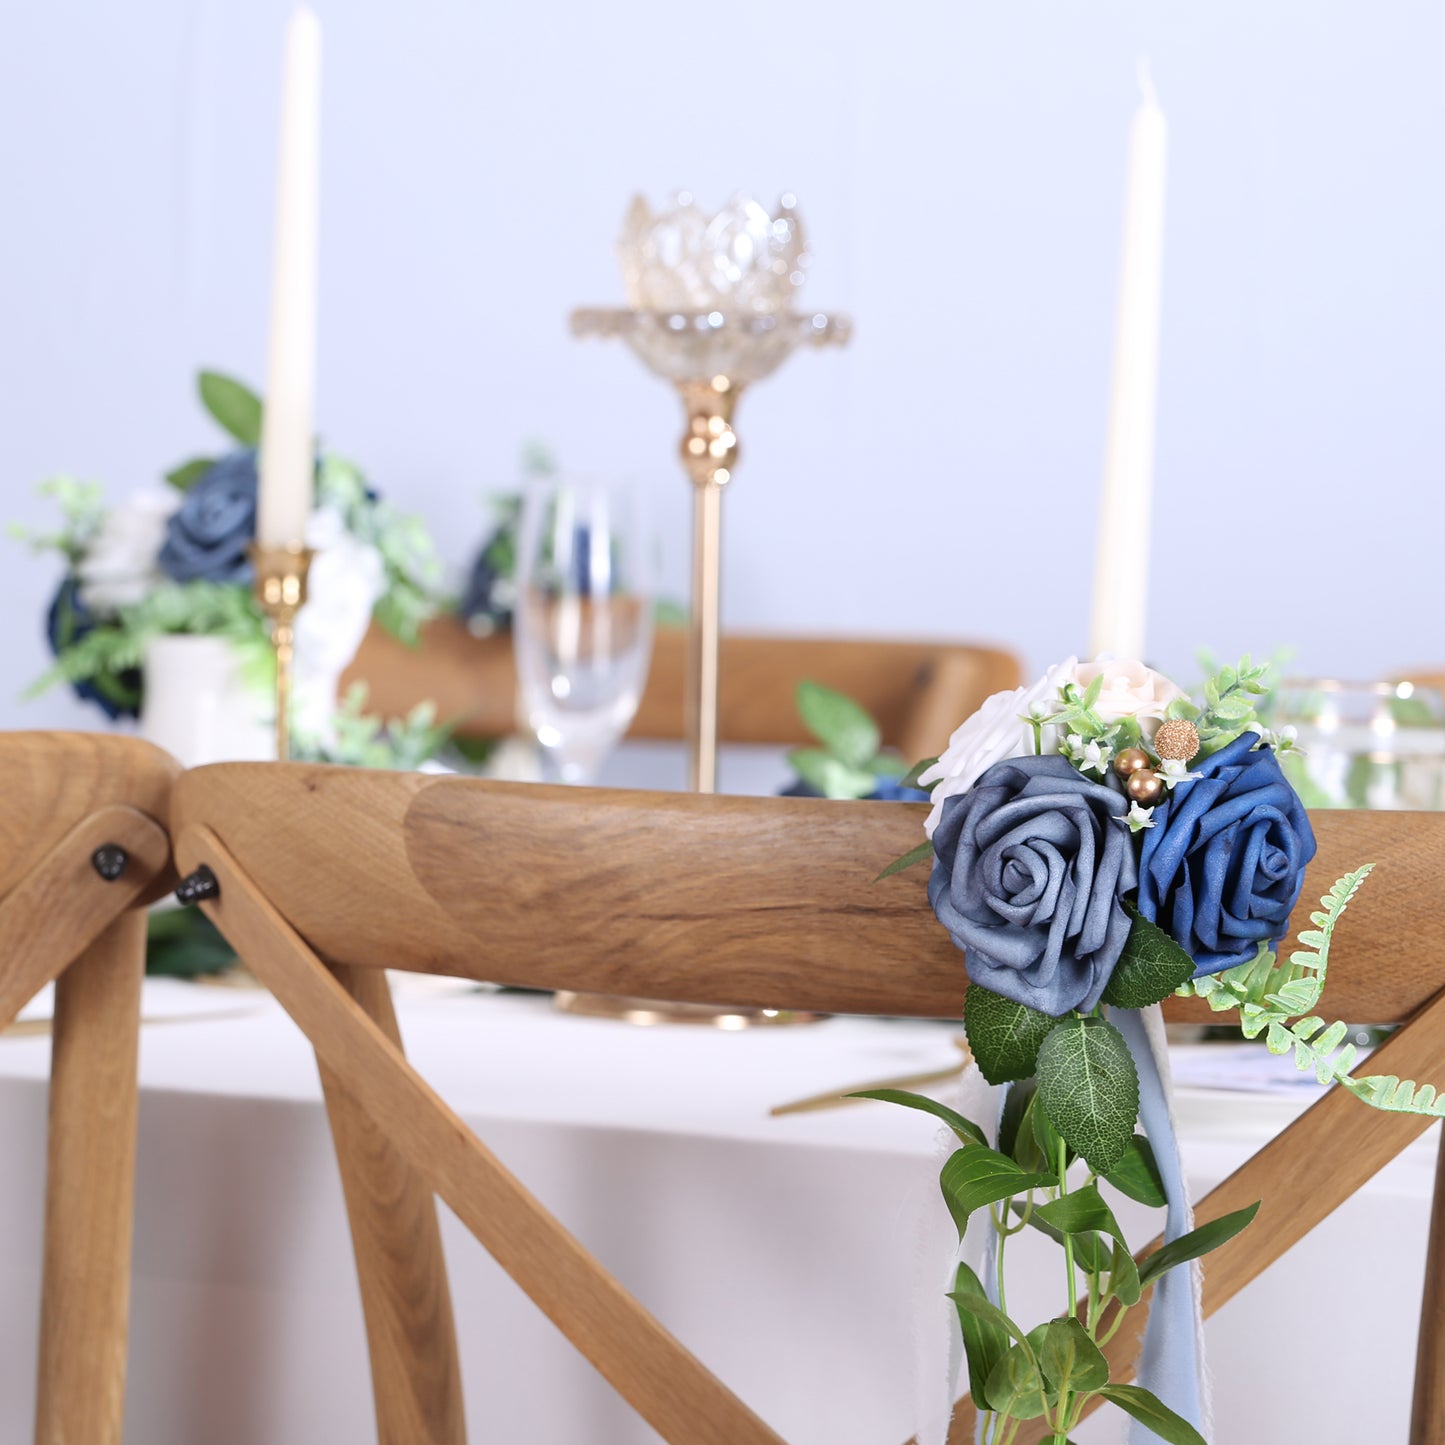 Wedding Aisle Decorations Blue Pew Flowers Set of 10 for Wedding Ceremony Party Chair Decor with Artificial Flowers Eucalyptus and Ribbons